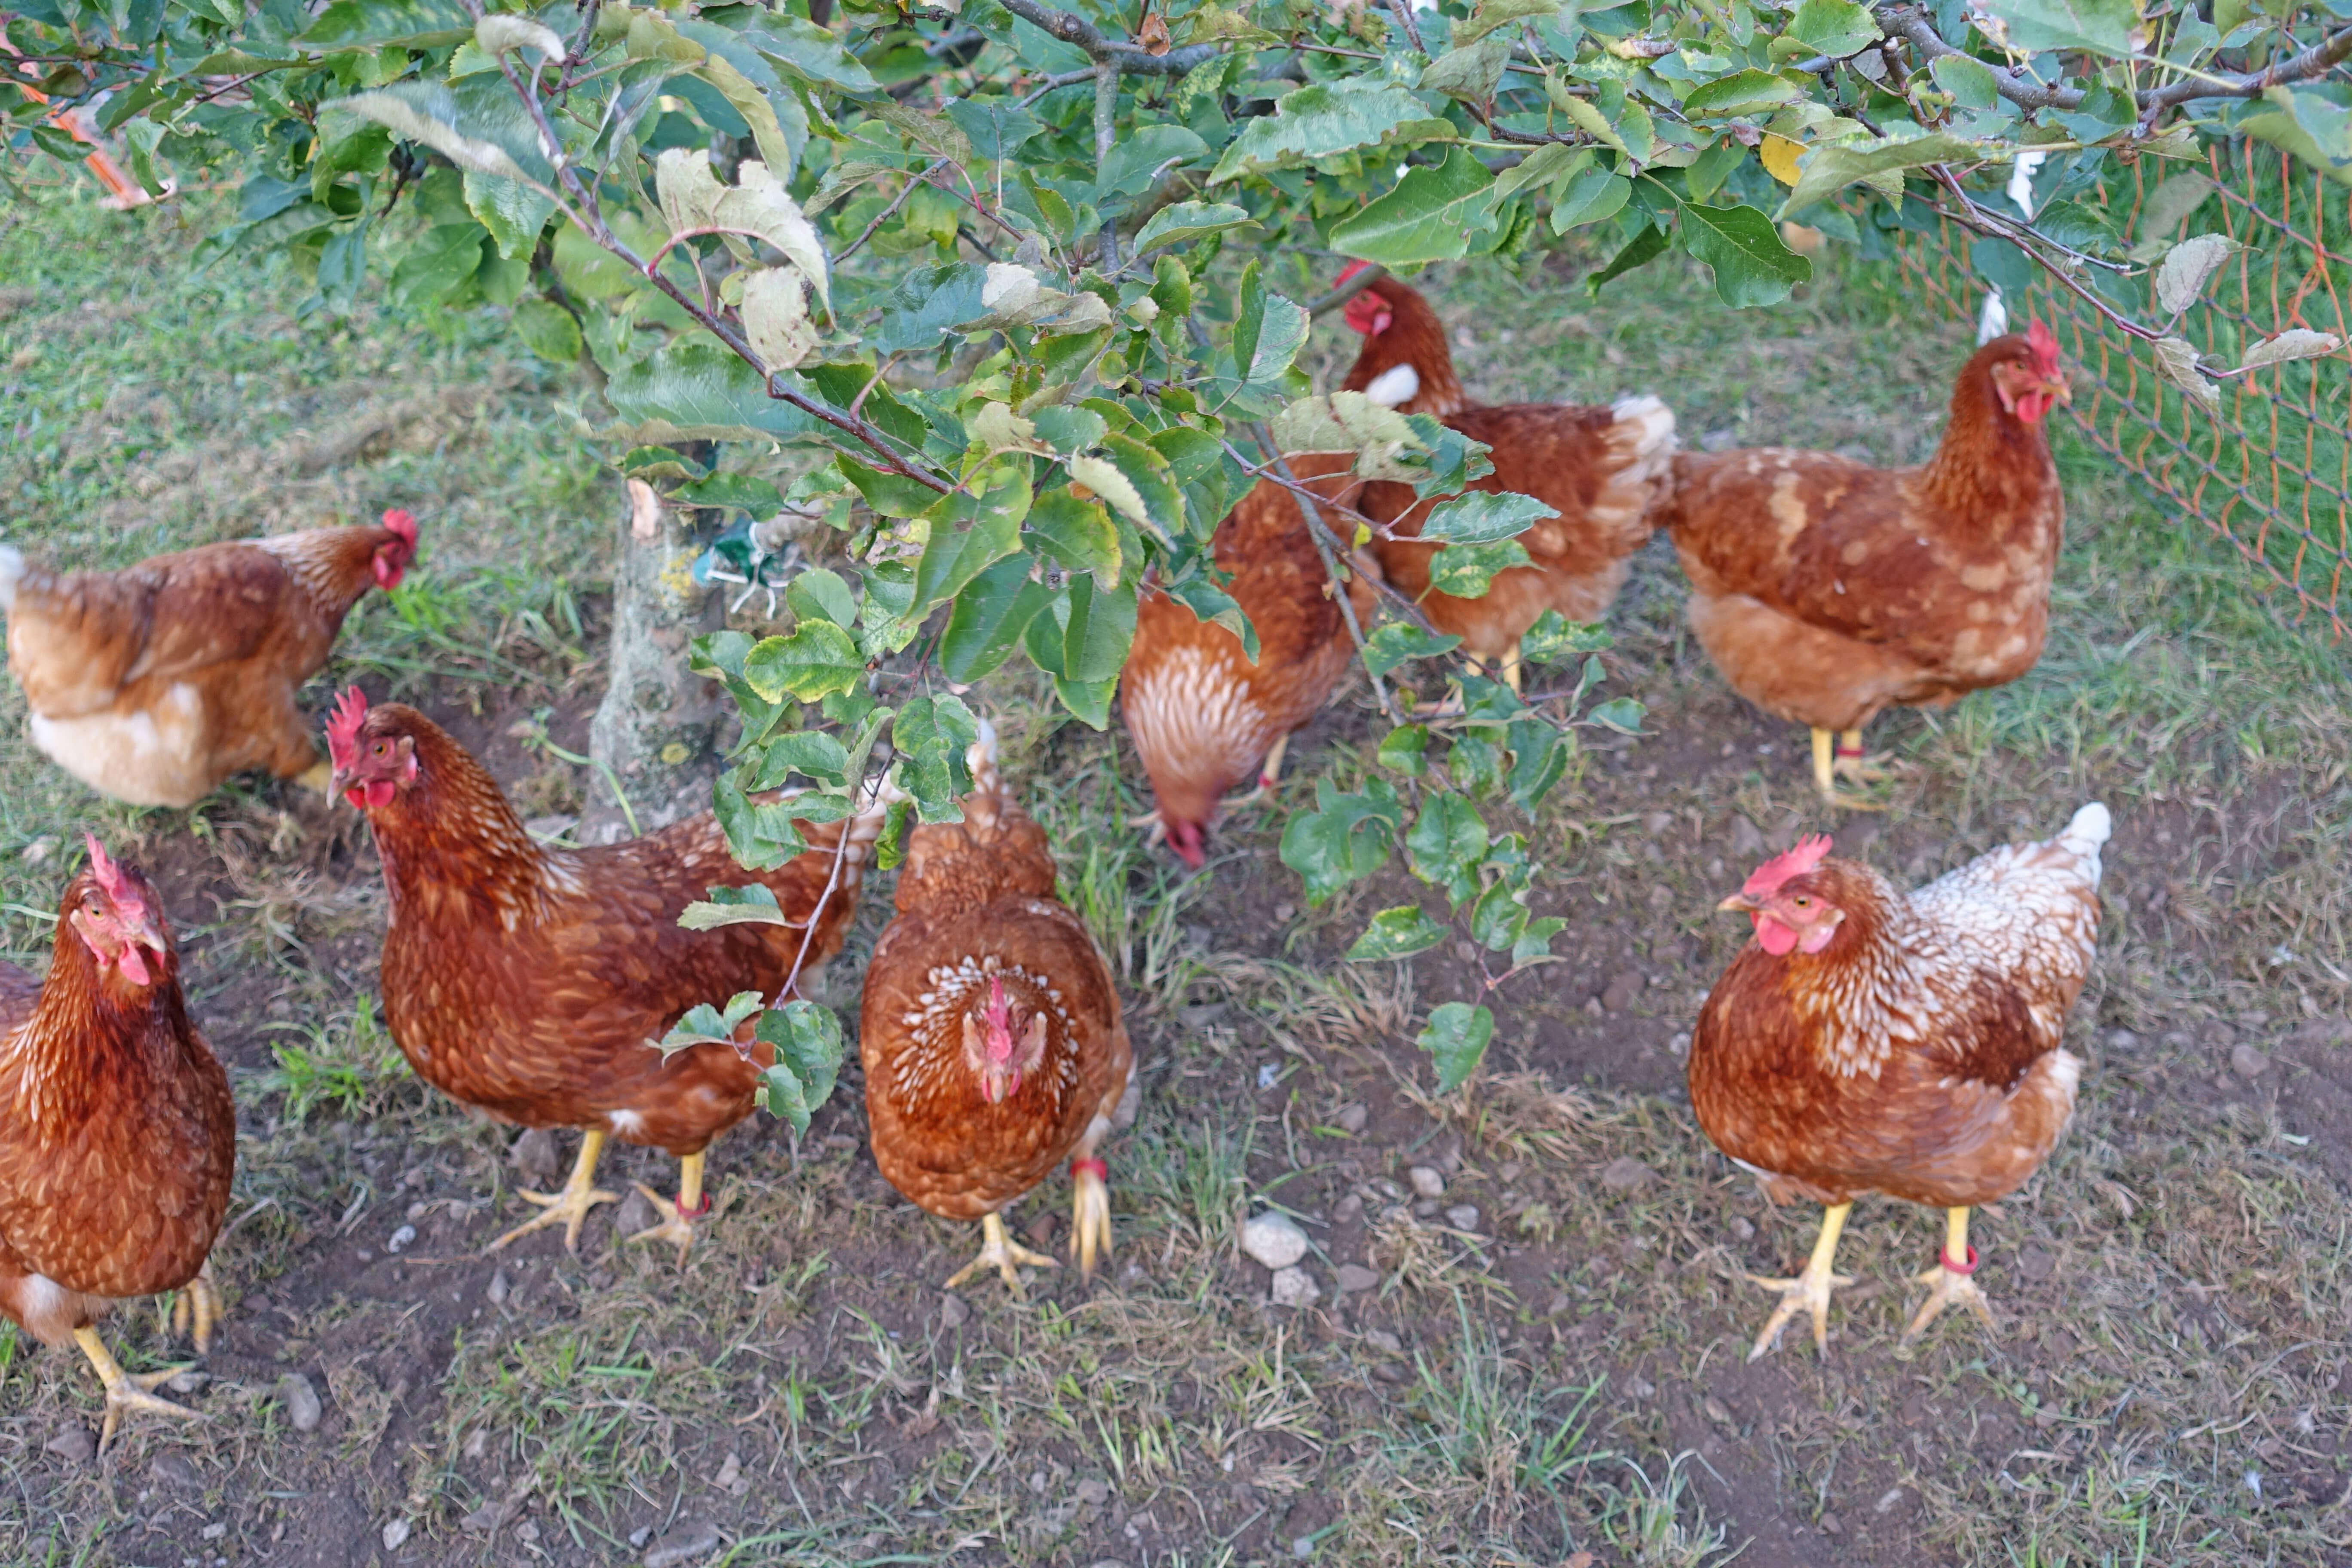 Chicken eggs direct sale from the farm